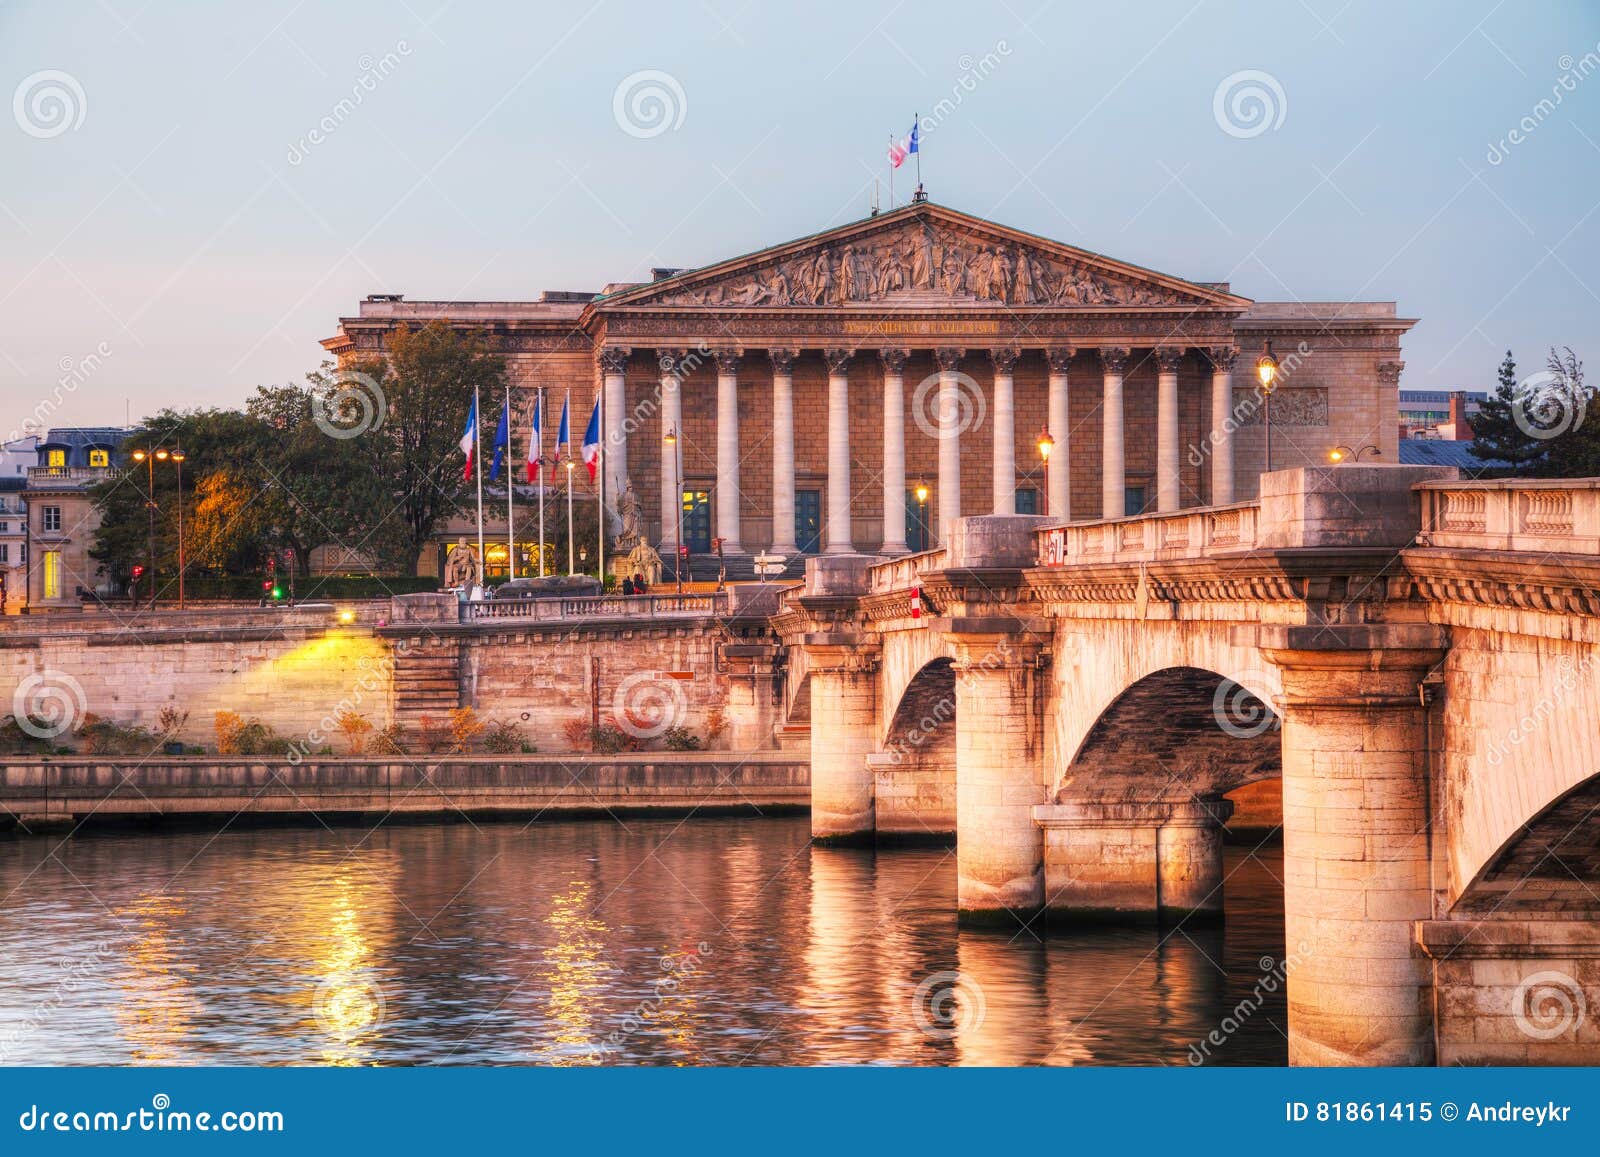 assemblee nationale national assembly in paris, france